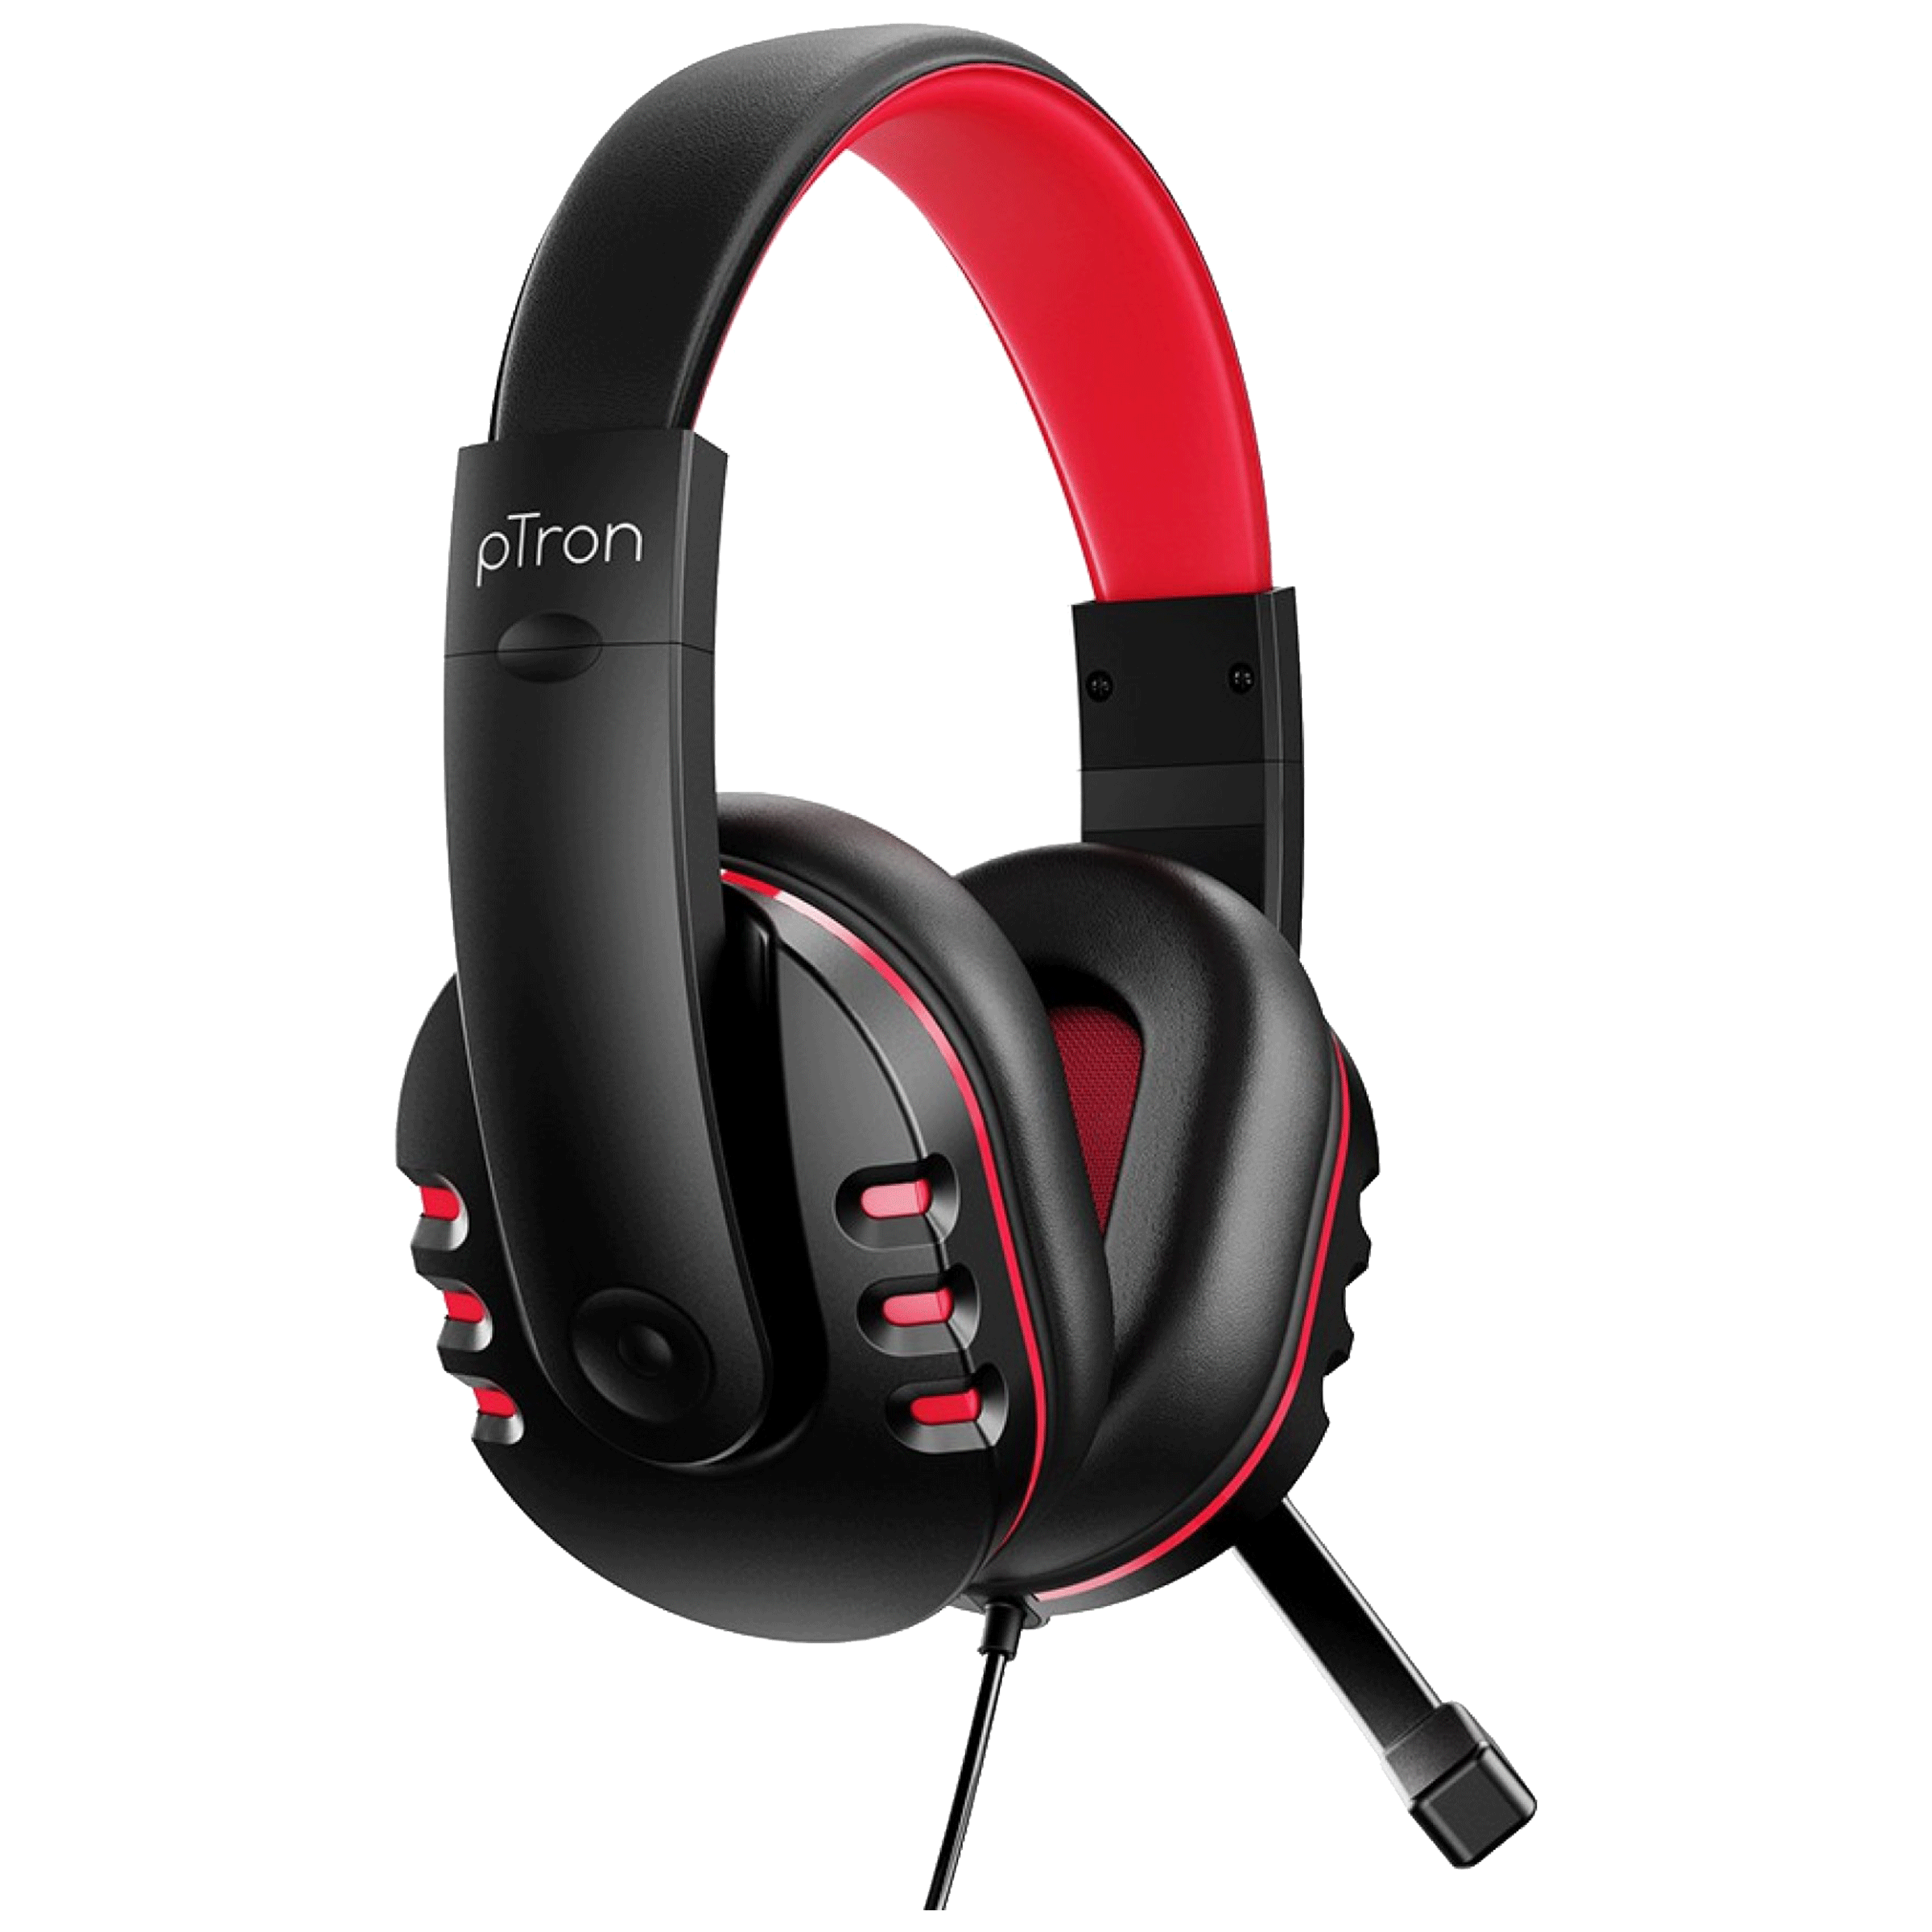 pTron Soundster Arcade 140317989 Over-Ear Wired Gaming Headphone with Mic (40mm Dynamic Driver, Black/Red)_1